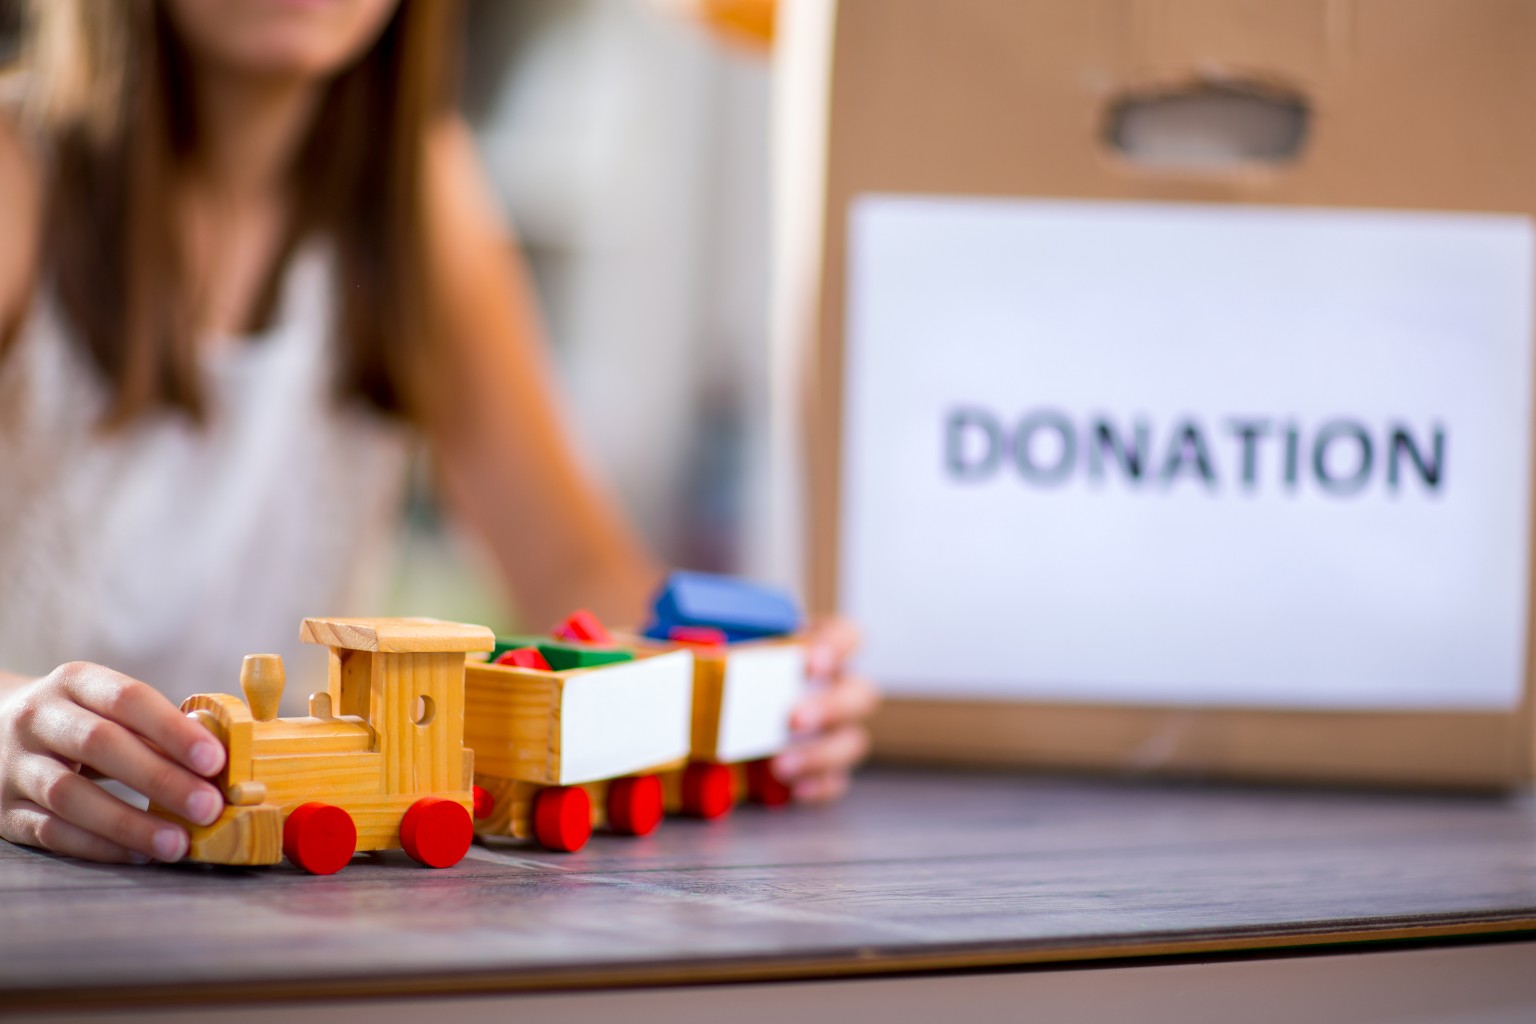 toy donate near me